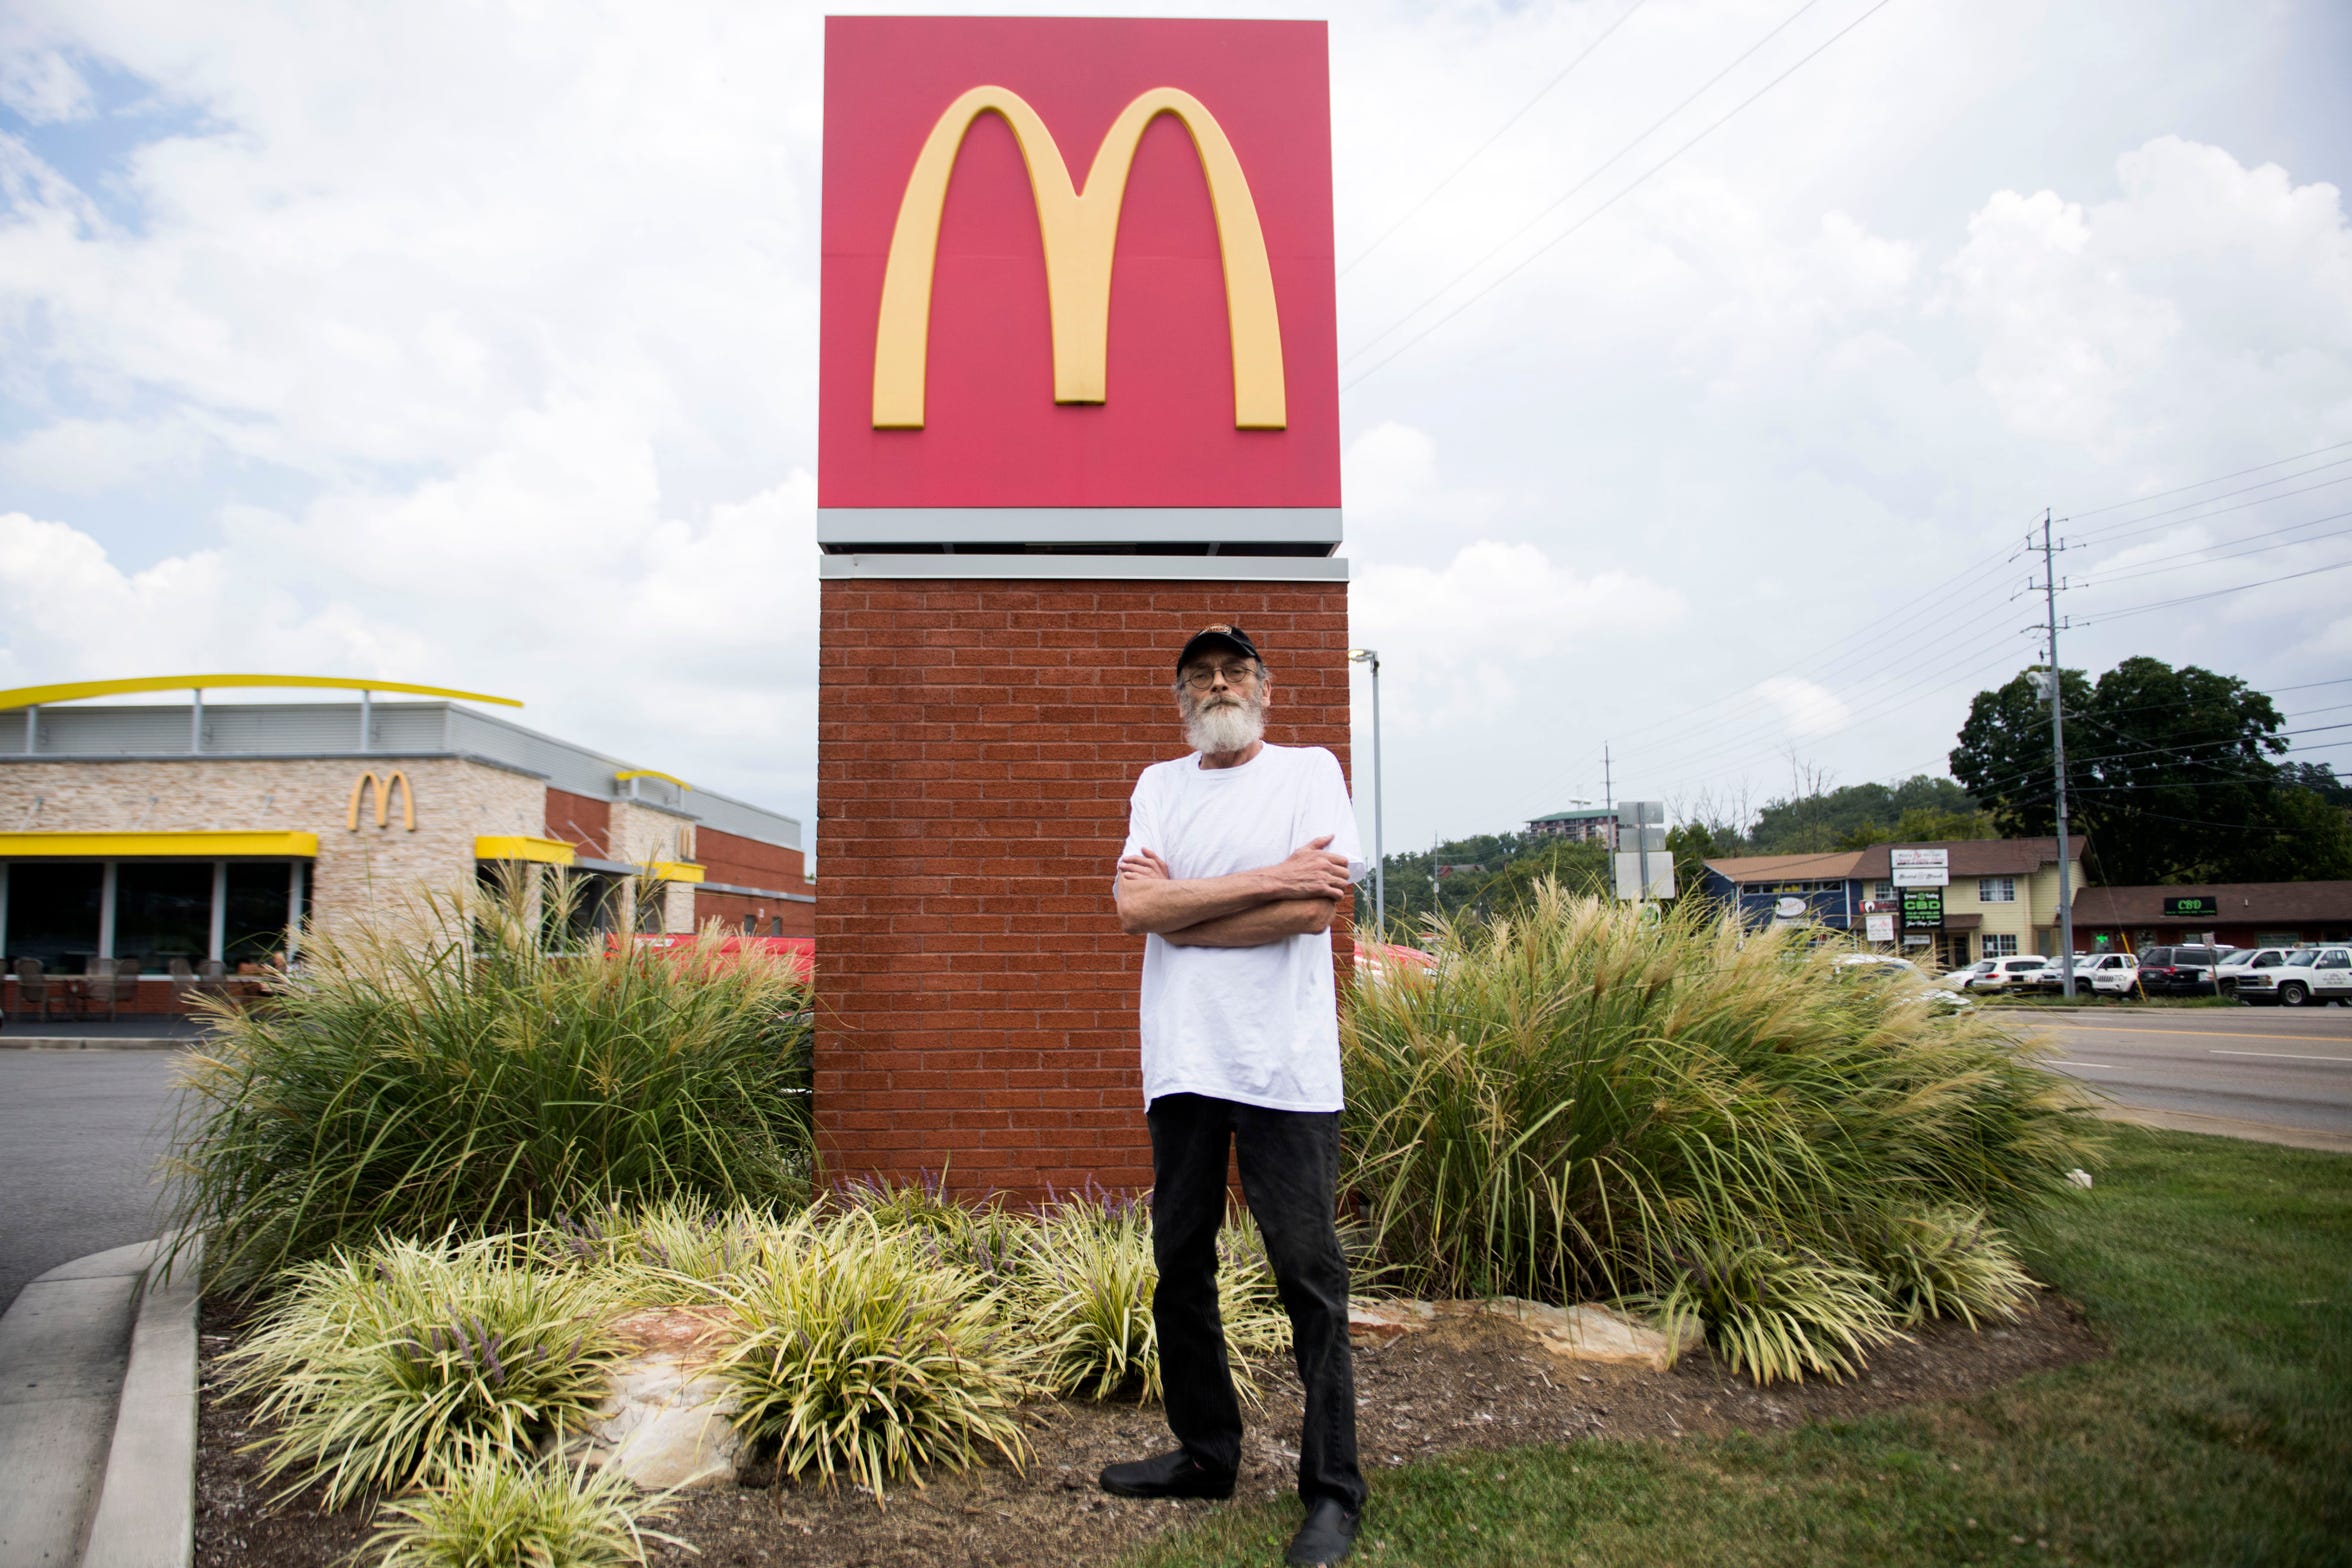 Alan Chrisman worked as a maintenance employee at this Sevierville, Tenn., McDonald's before being diagnosed with stage IV colorectal cancer in November 2017. He's now on his 11th dose of chemotherapy. After his 12th next month, he will return for a scan.